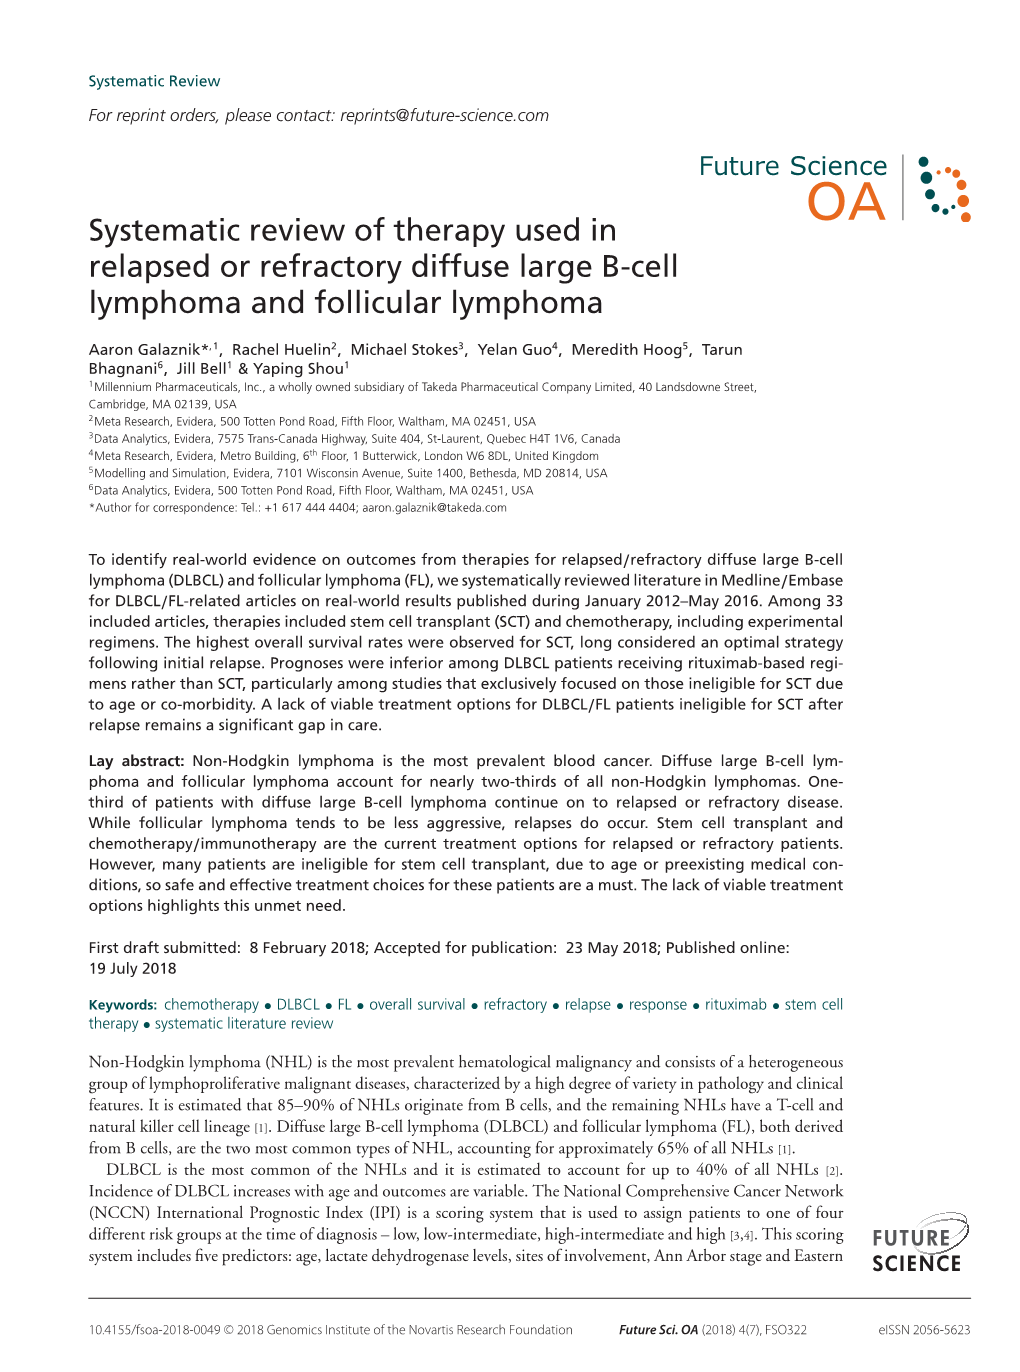 Systematic Review of Therapy Used in Relapsed Or Refractory Diffuse Large B-Cell Lymphoma and Follicular Lymphoma